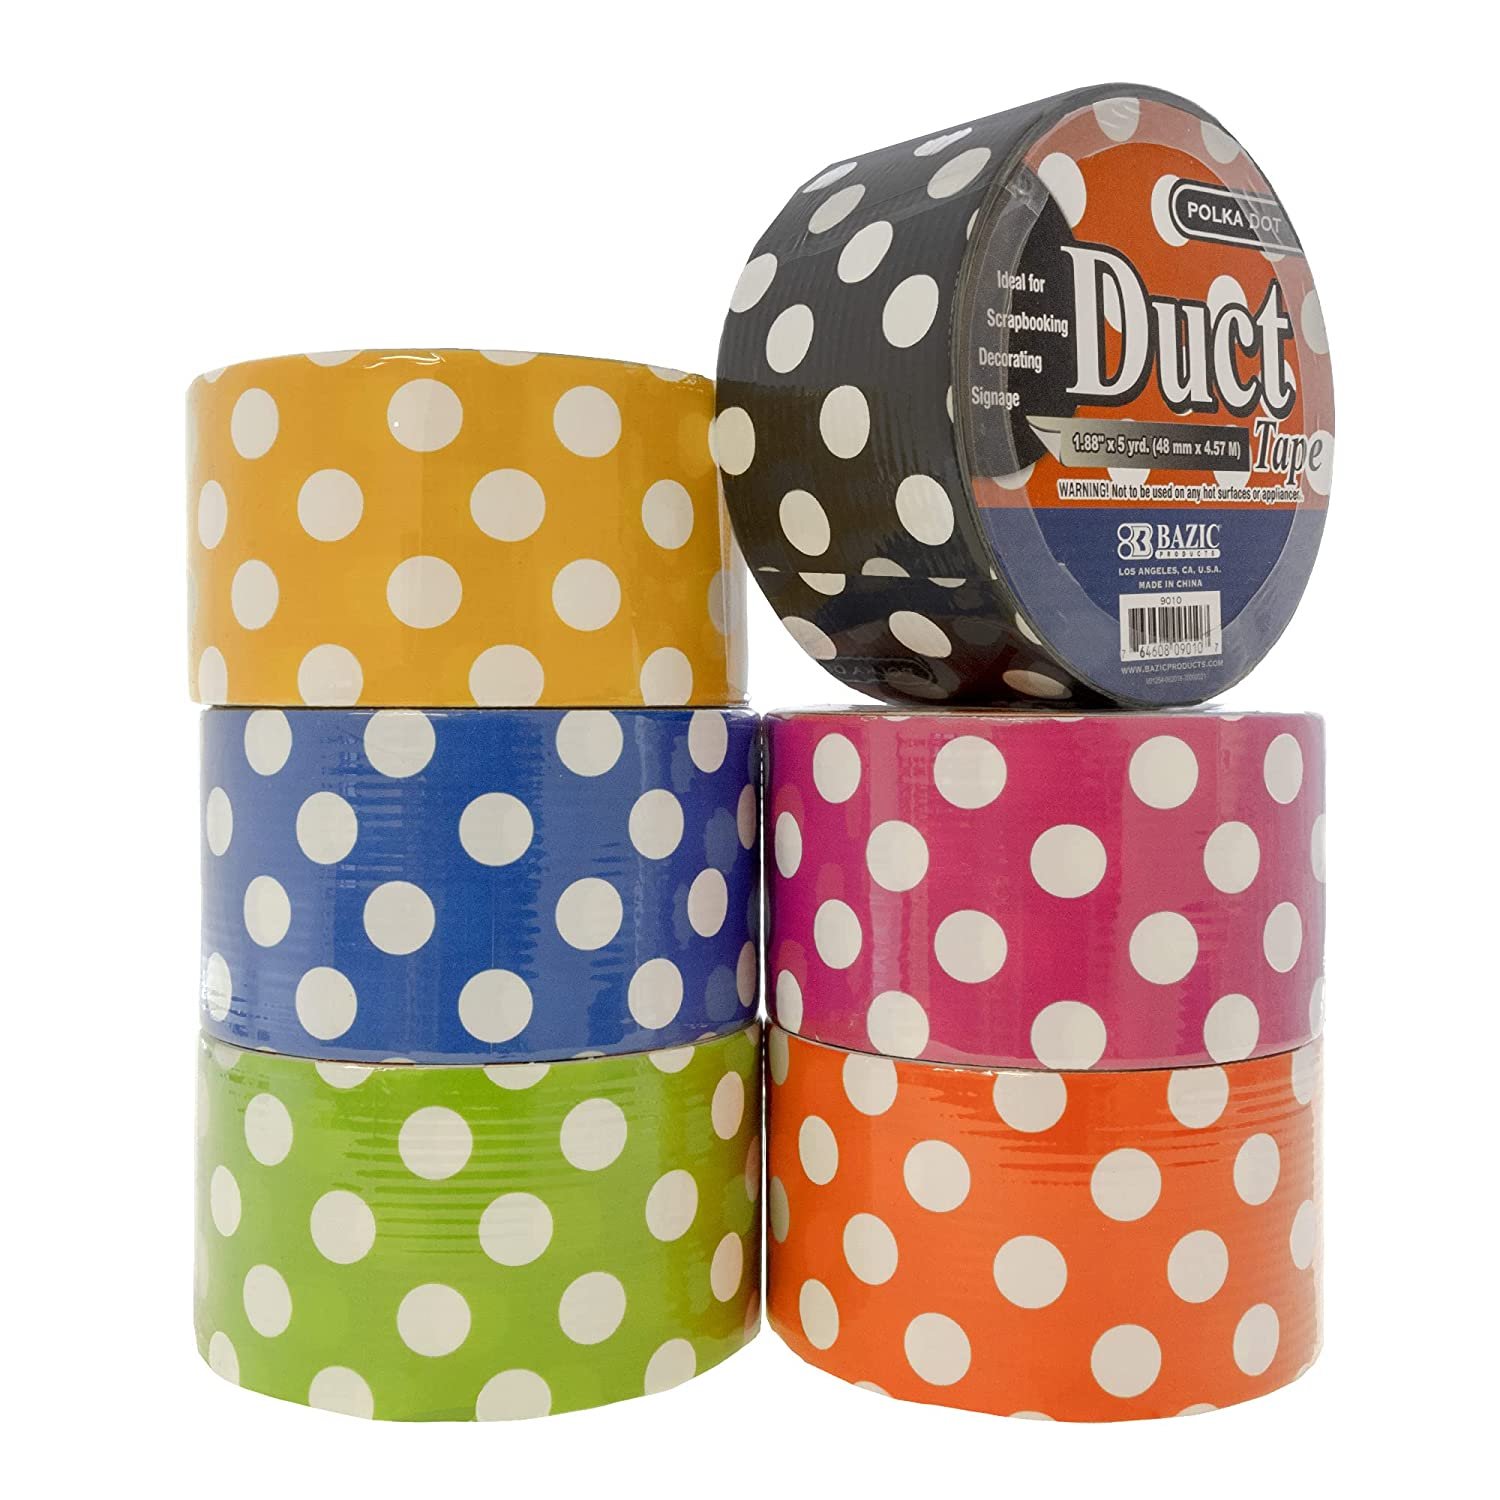 RamPro Chevron & Polka Dot Styles Heavy-Duty Duct Tape 1.88-inch x 5 Yard. Assorted Colors Pack of 12 Rolls 